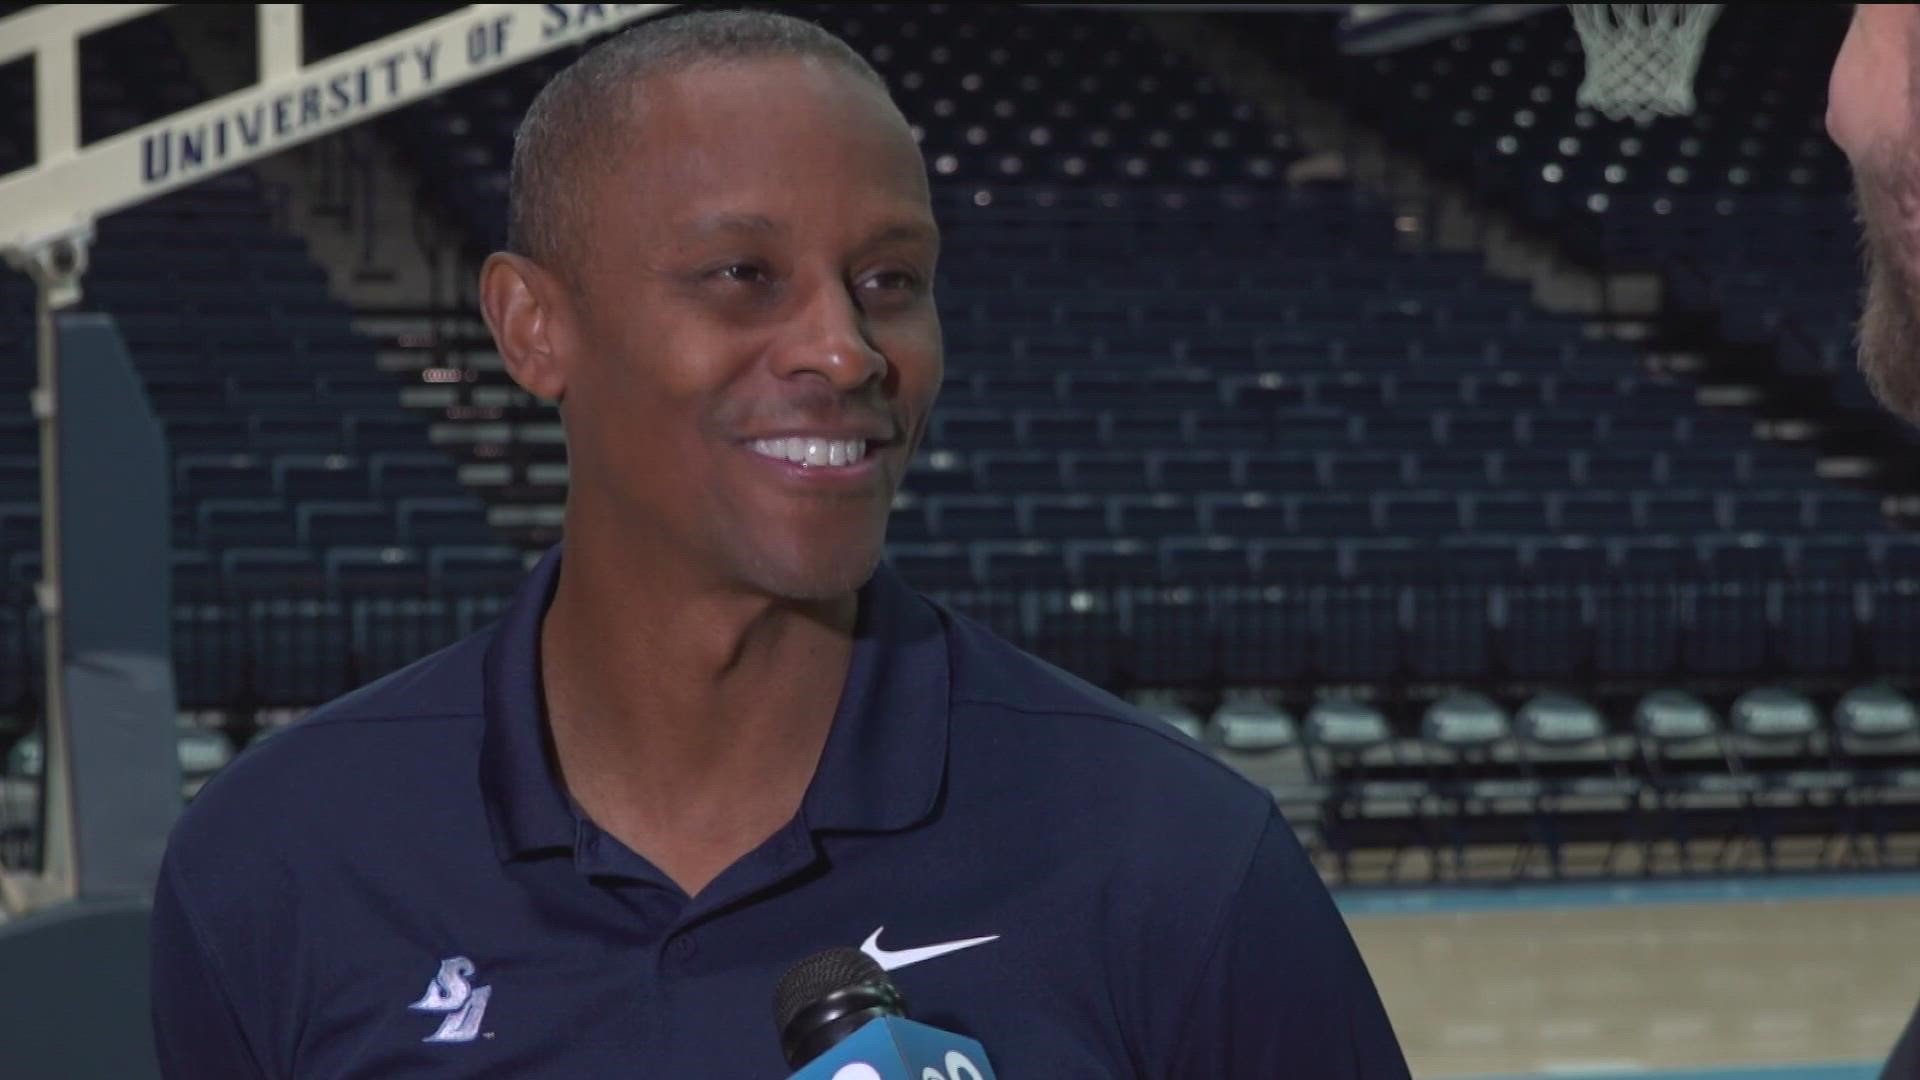 He made one of the most famous shots in college basketball history. Now, Tyus Edney is hoping to bring that championship mentality to the University of San Diego.